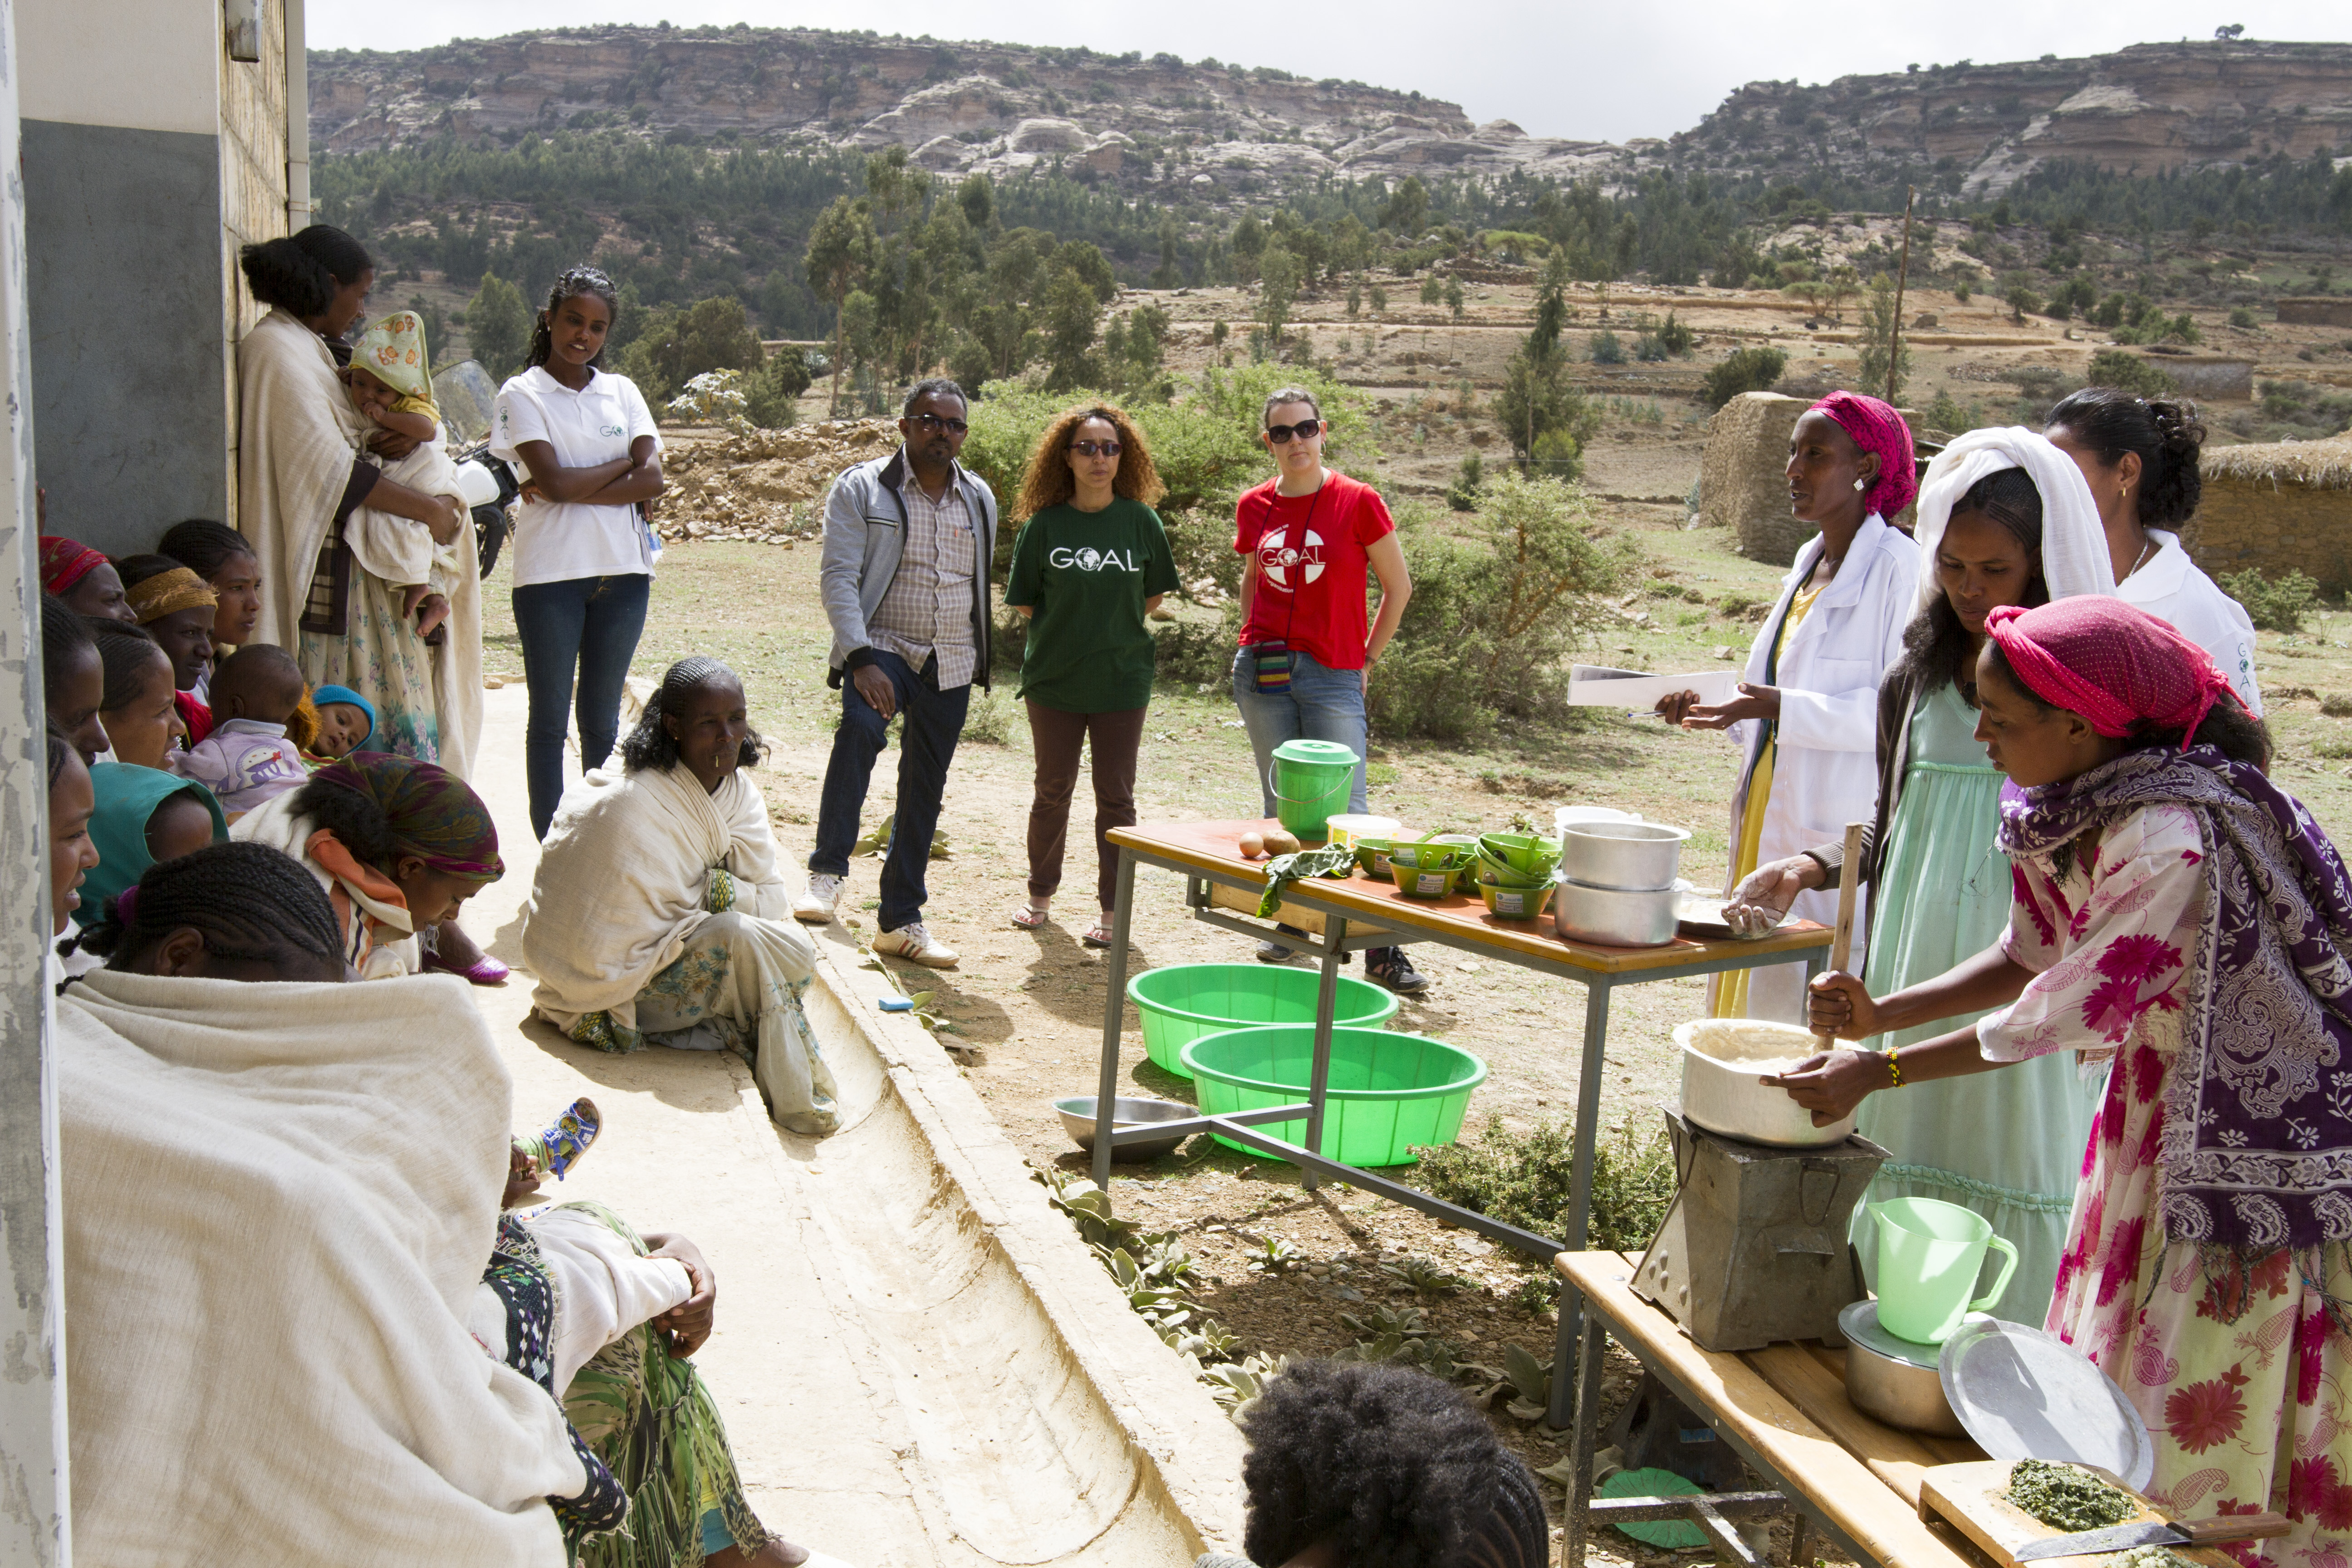 Cooking demonstration as a part of IYCF session by Health Extension Worker, Tigray region